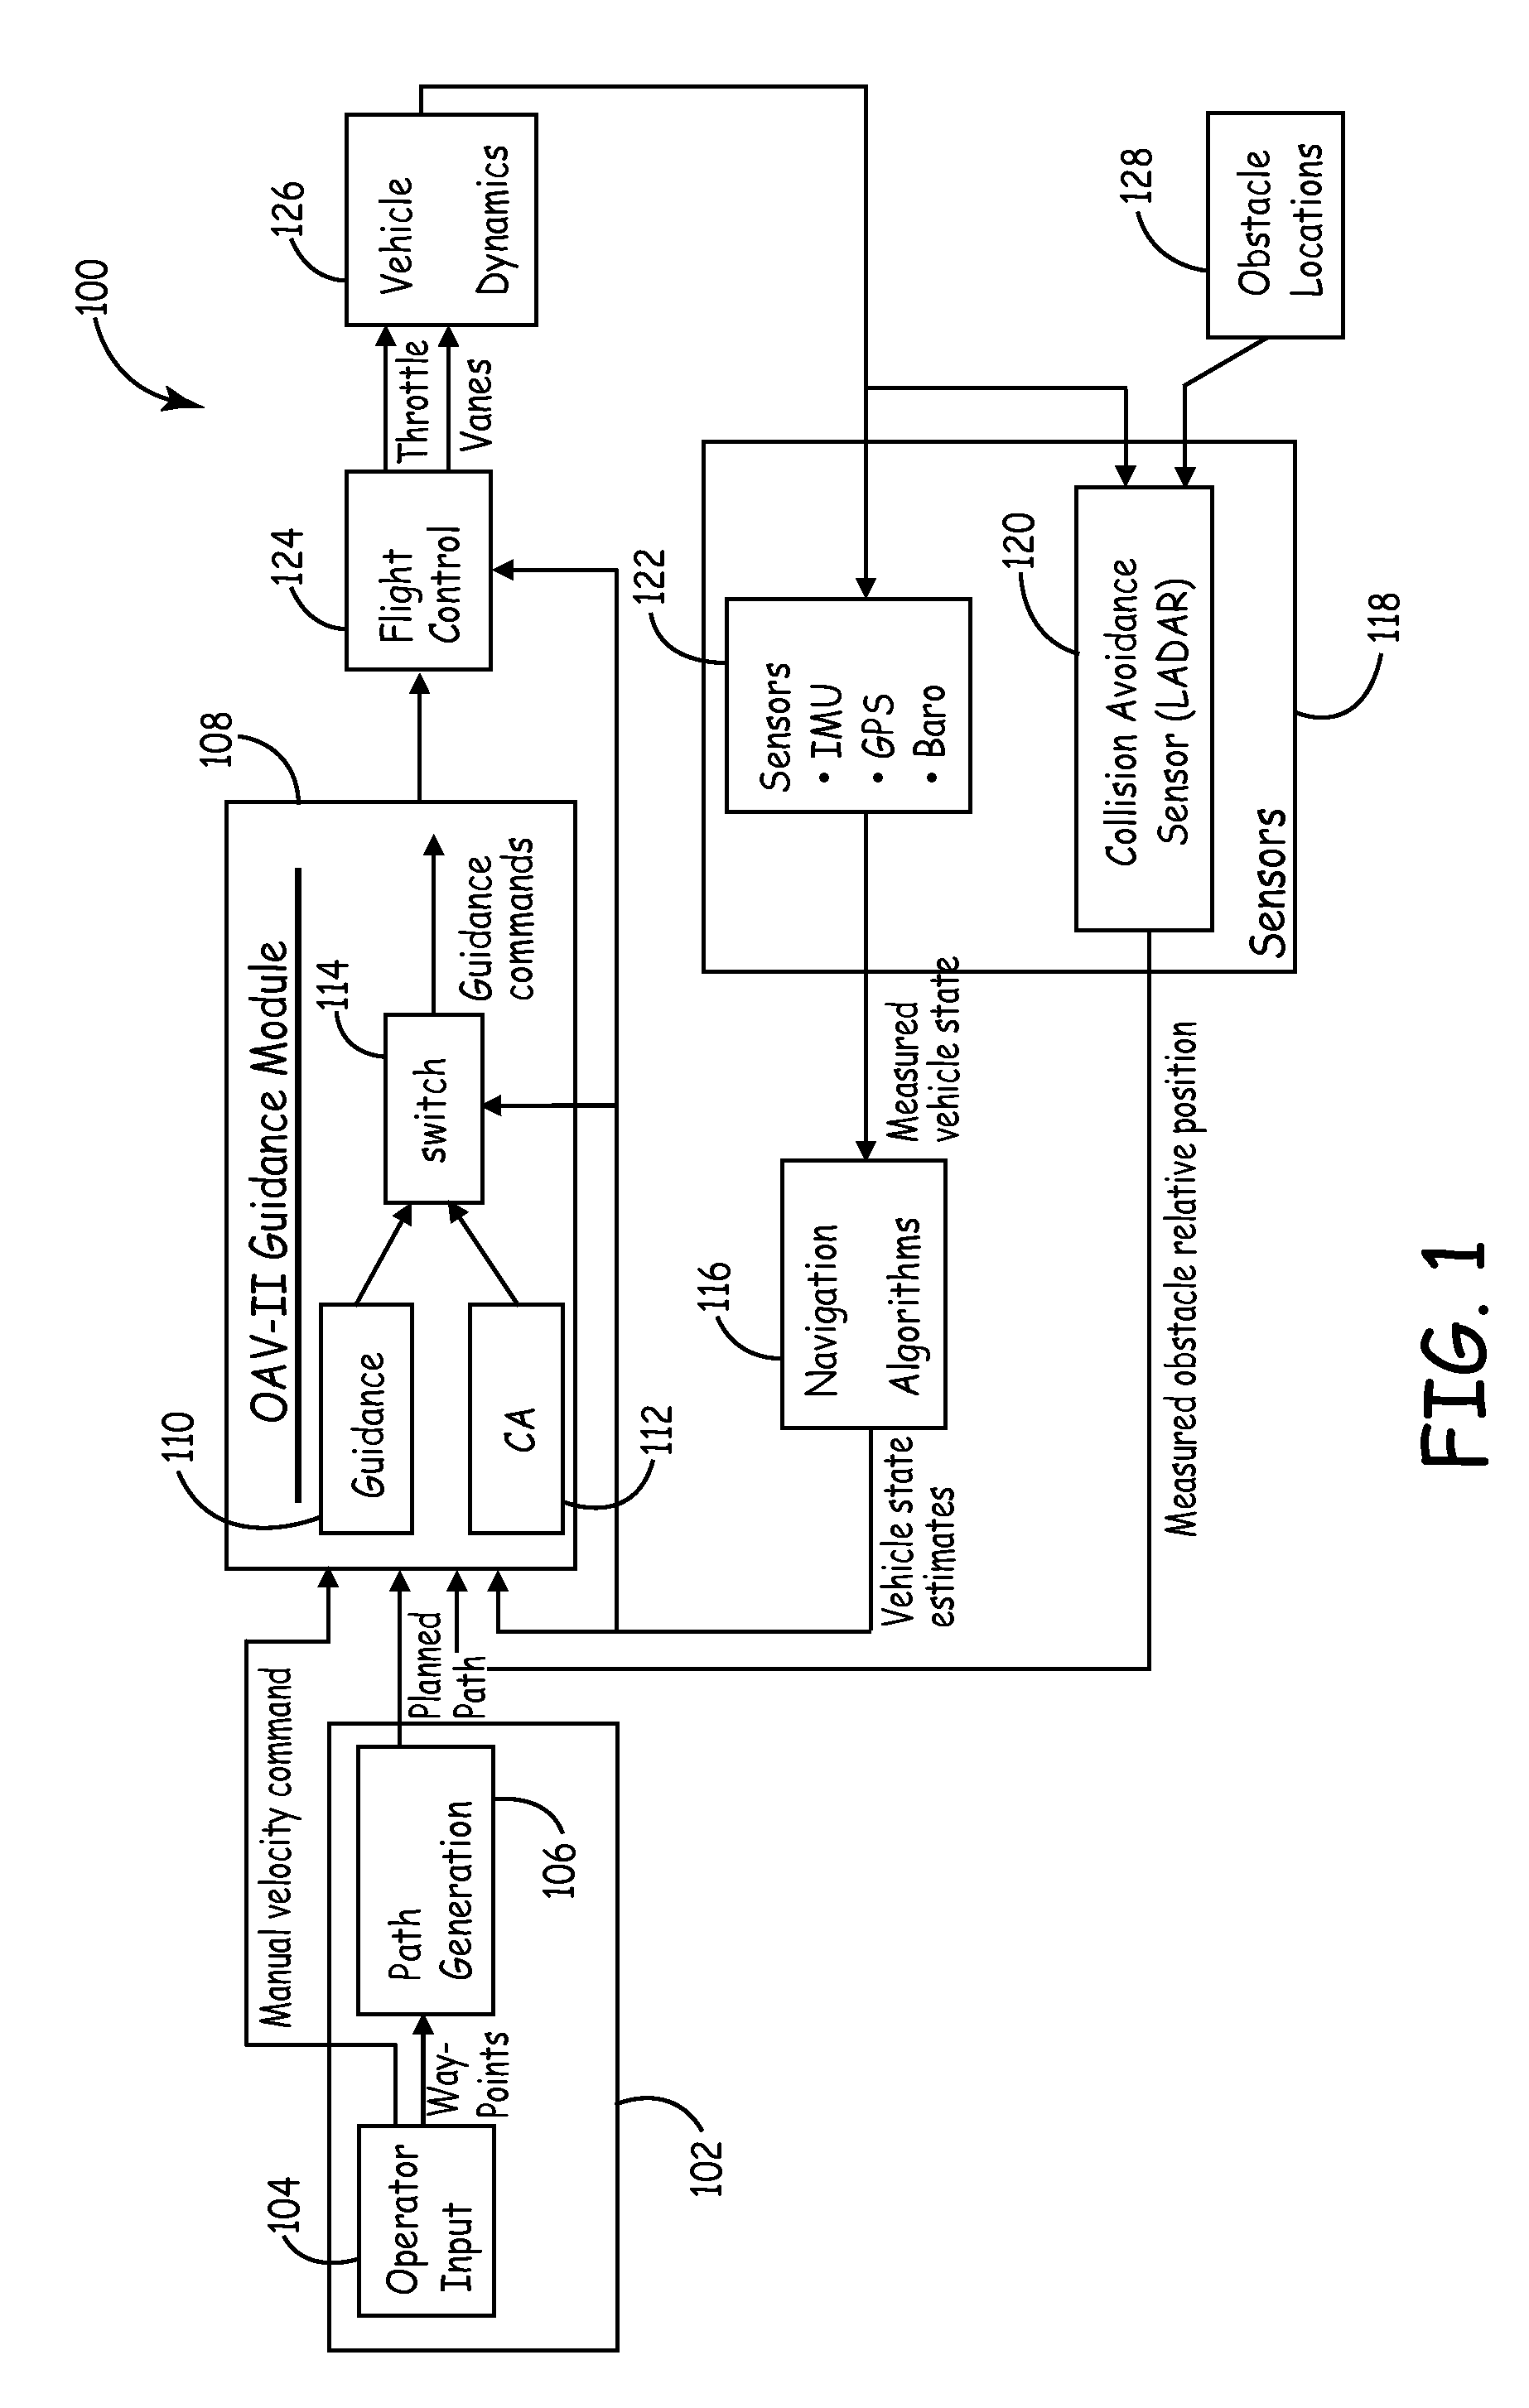 Method and system for automatic path planning and obstacle/collision avoidance of autonomous vehicles